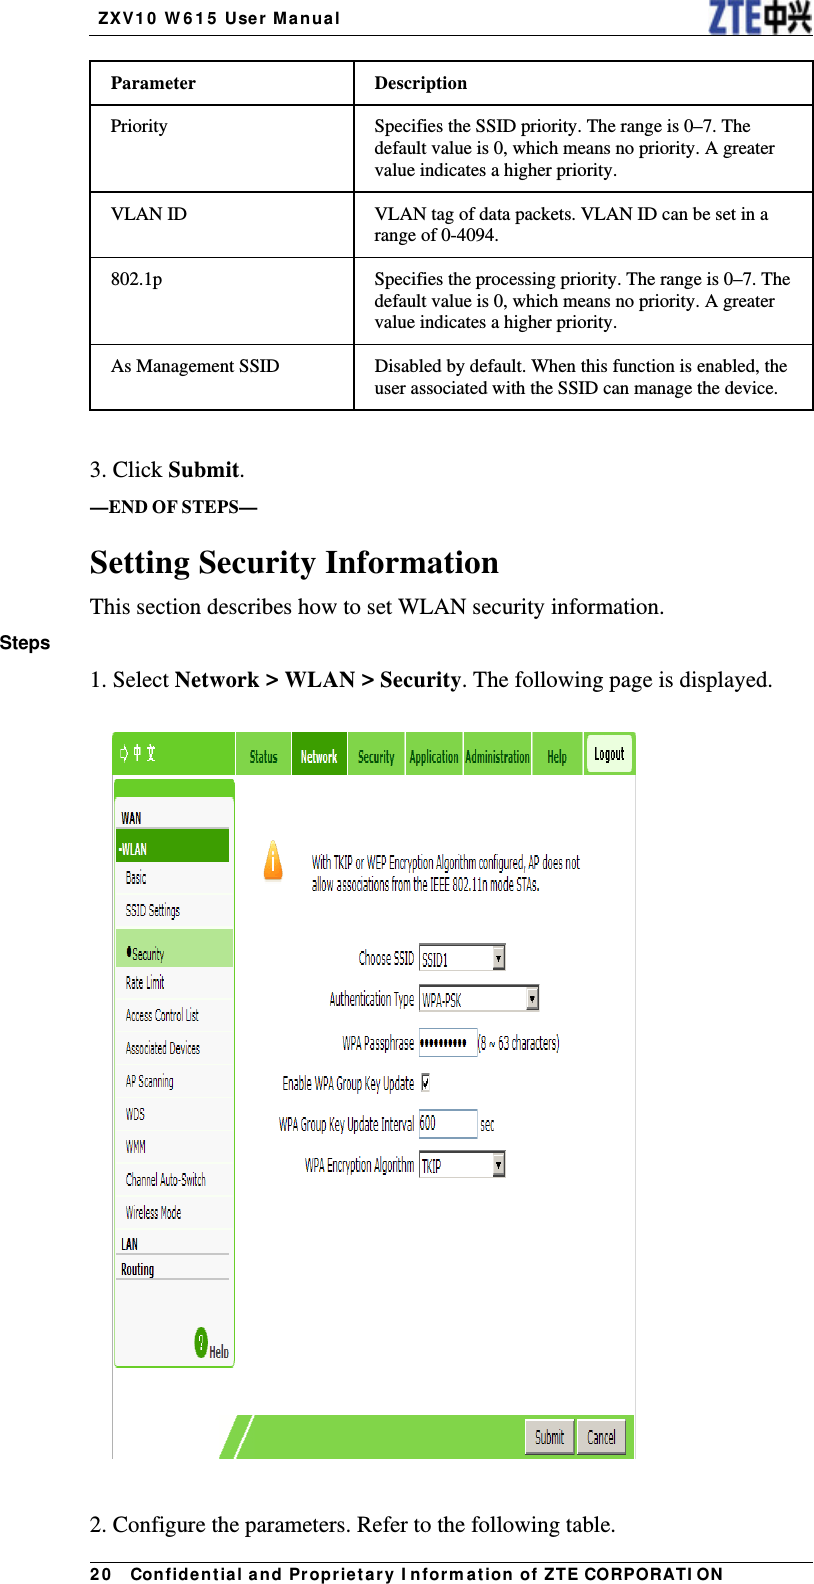   ZX V1 0  W 6 1 5  User Manua l 2 0   Con fidential and Pr opr ietary I nform a t ion of ZTE CORPORATI ONParameter Description Priority  Specifies the SSID priority. The range is 0–7. The default value is 0, which means no priority. A greater value indicates a higher priority. VLAN ID  VLAN tag of data packets. VLAN ID can be set in a range of 0-4094. 802.1p  Specifies the processing priority. The range is 0–7. The default value is 0, which means no priority. A greater value indicates a higher priority. As Management SSID  Disabled by default. When this function is enabled, the user associated with the SSID can manage the device.      3. Click Submit. —END OF STEPS— Setting Security Information This section describes how to set WLAN security information. Steps 1. Select Network &gt; WLAN &gt; Security. The following page is displayed.    2. Configure the parameters. Refer to the following table. 